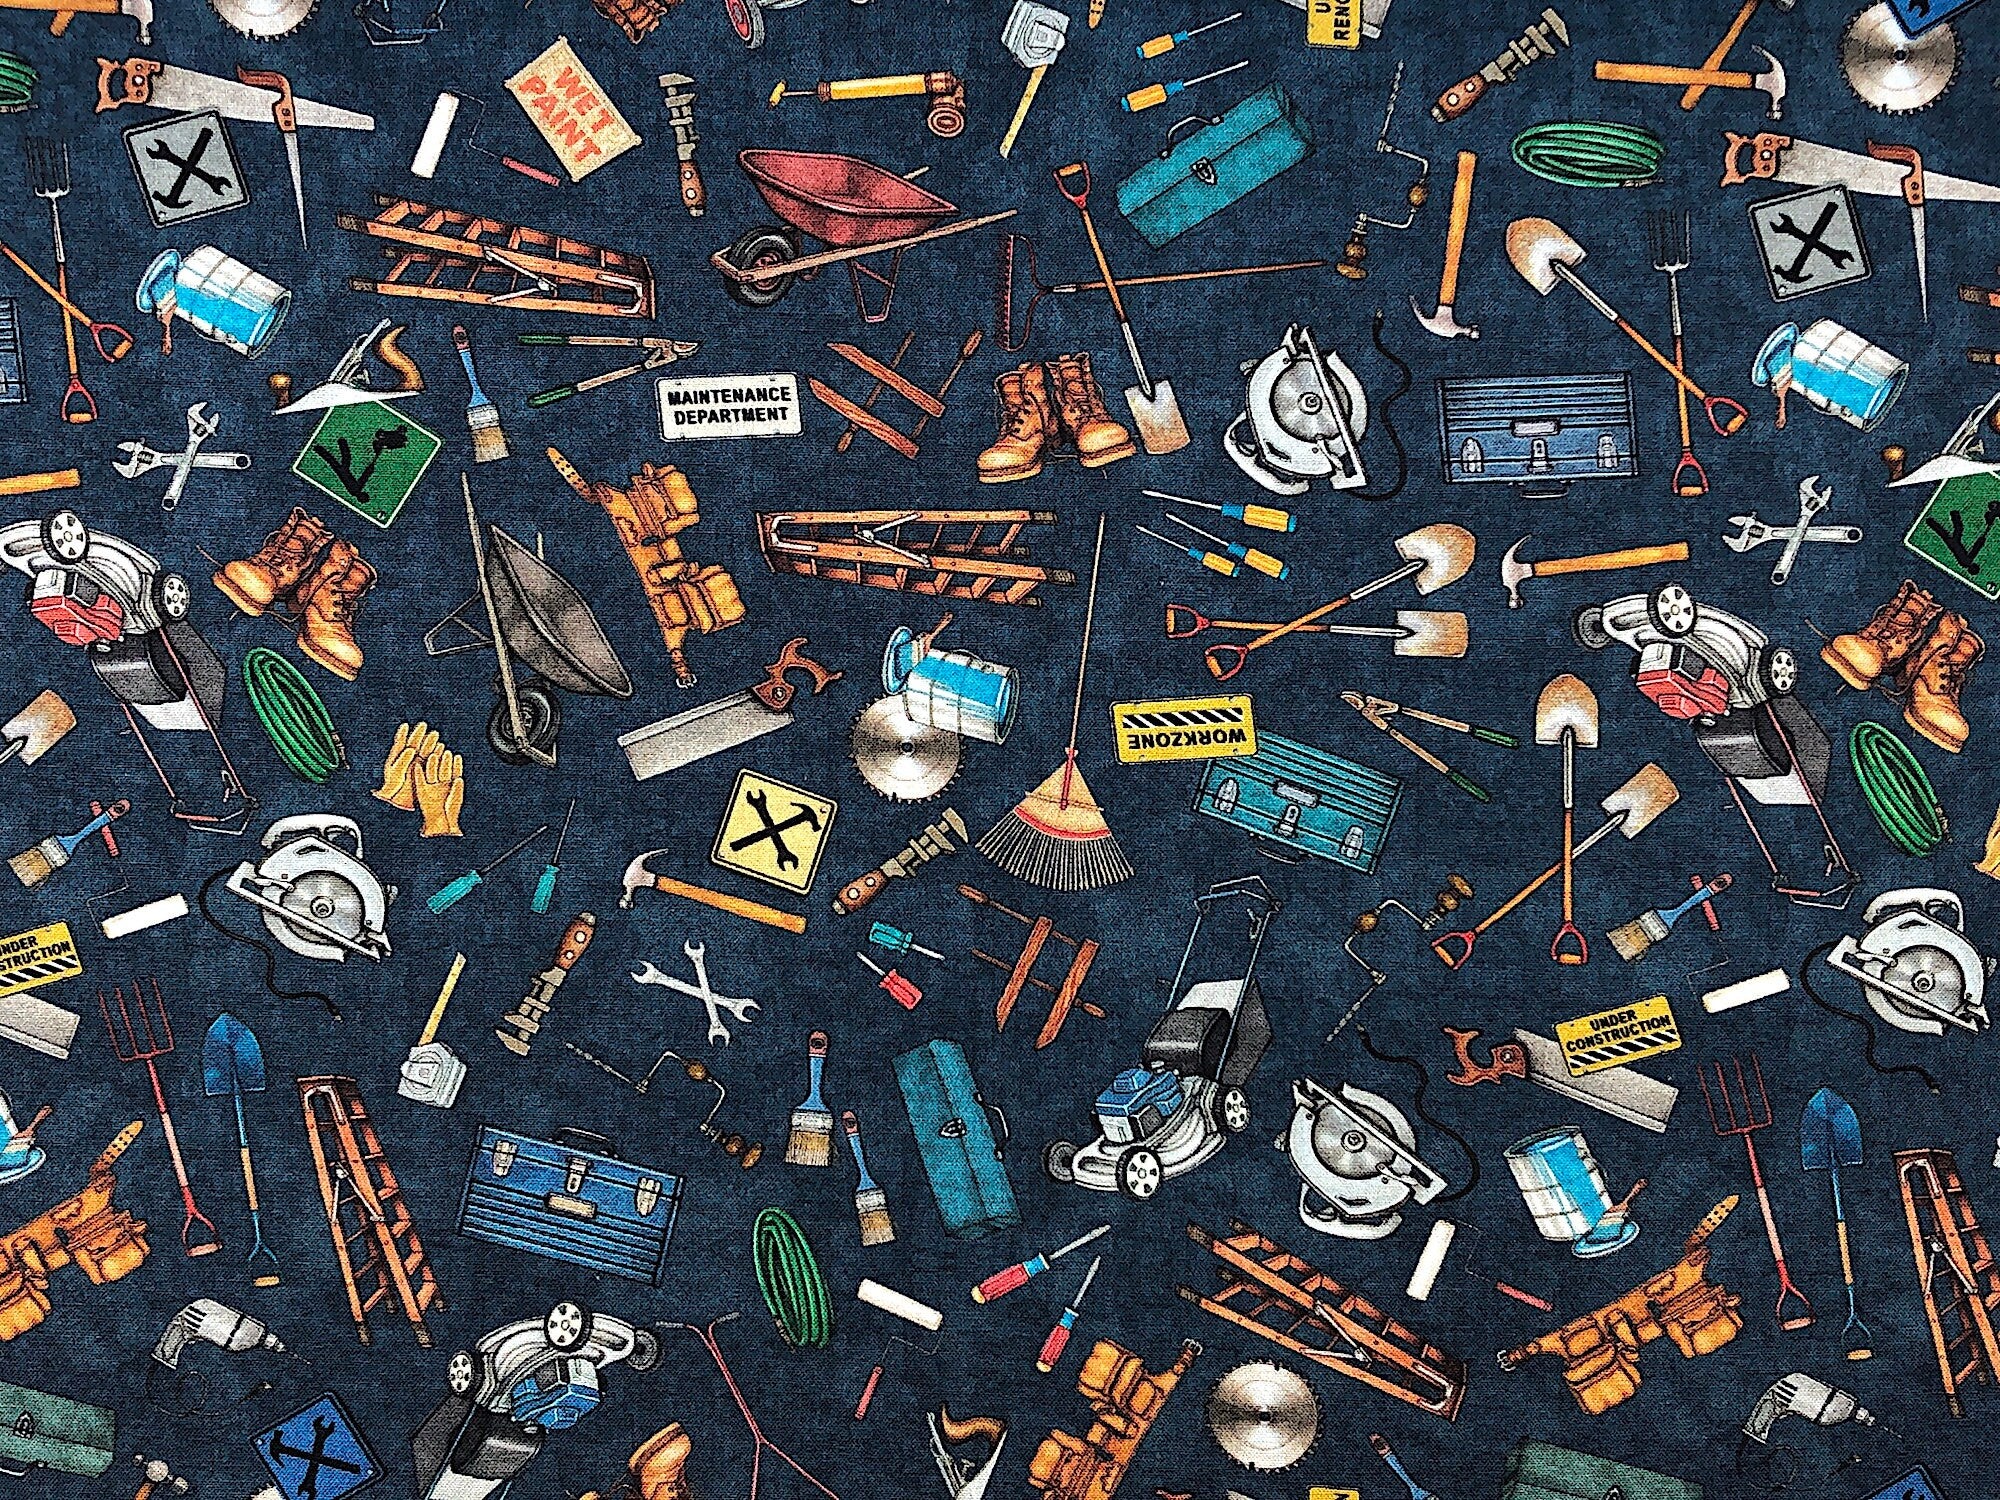 This blue fabric is covered with lawnmowers, boots, hammers, saws, ladders, tool boxes, wheelbarrows and more.